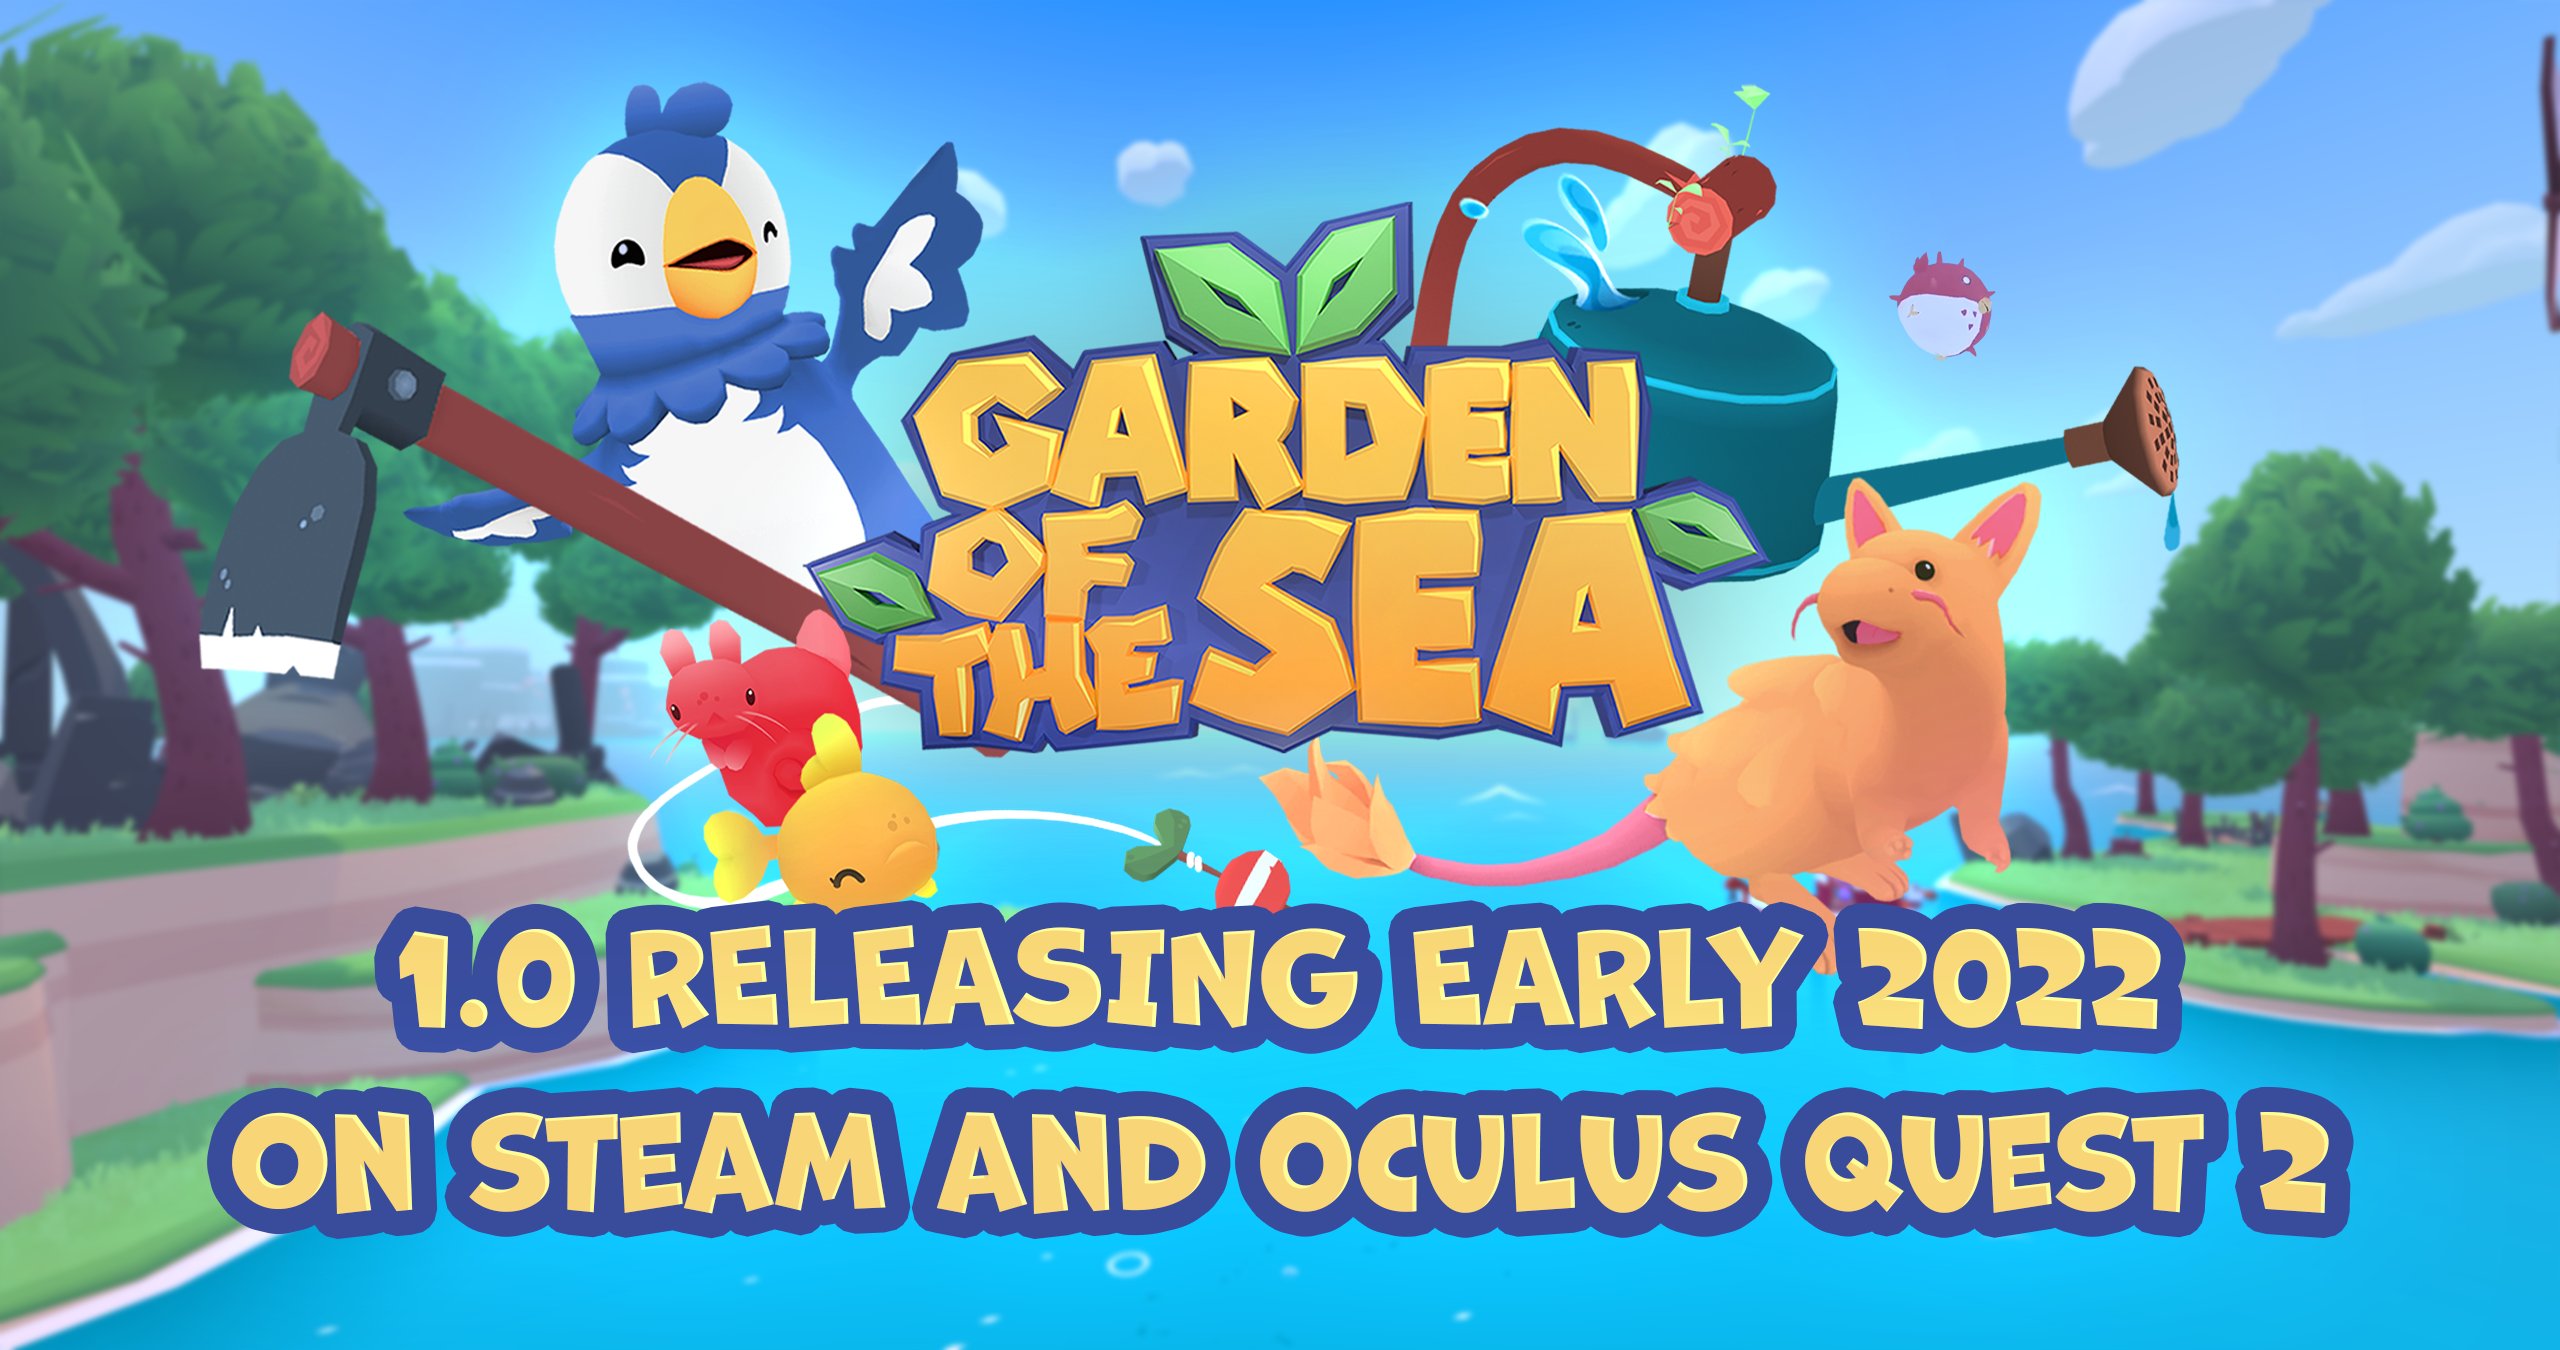 Turbine ur Synslinie Neat Corporation on Twitter: "We are so happy to announce that Garden of  the Sea 1.0 will be coming to Oculus Quest 2 and Steam early 2022! 🌱  #GardenOfTheSea #VR https://t.co/dmVZFhKcCp" / Twitter